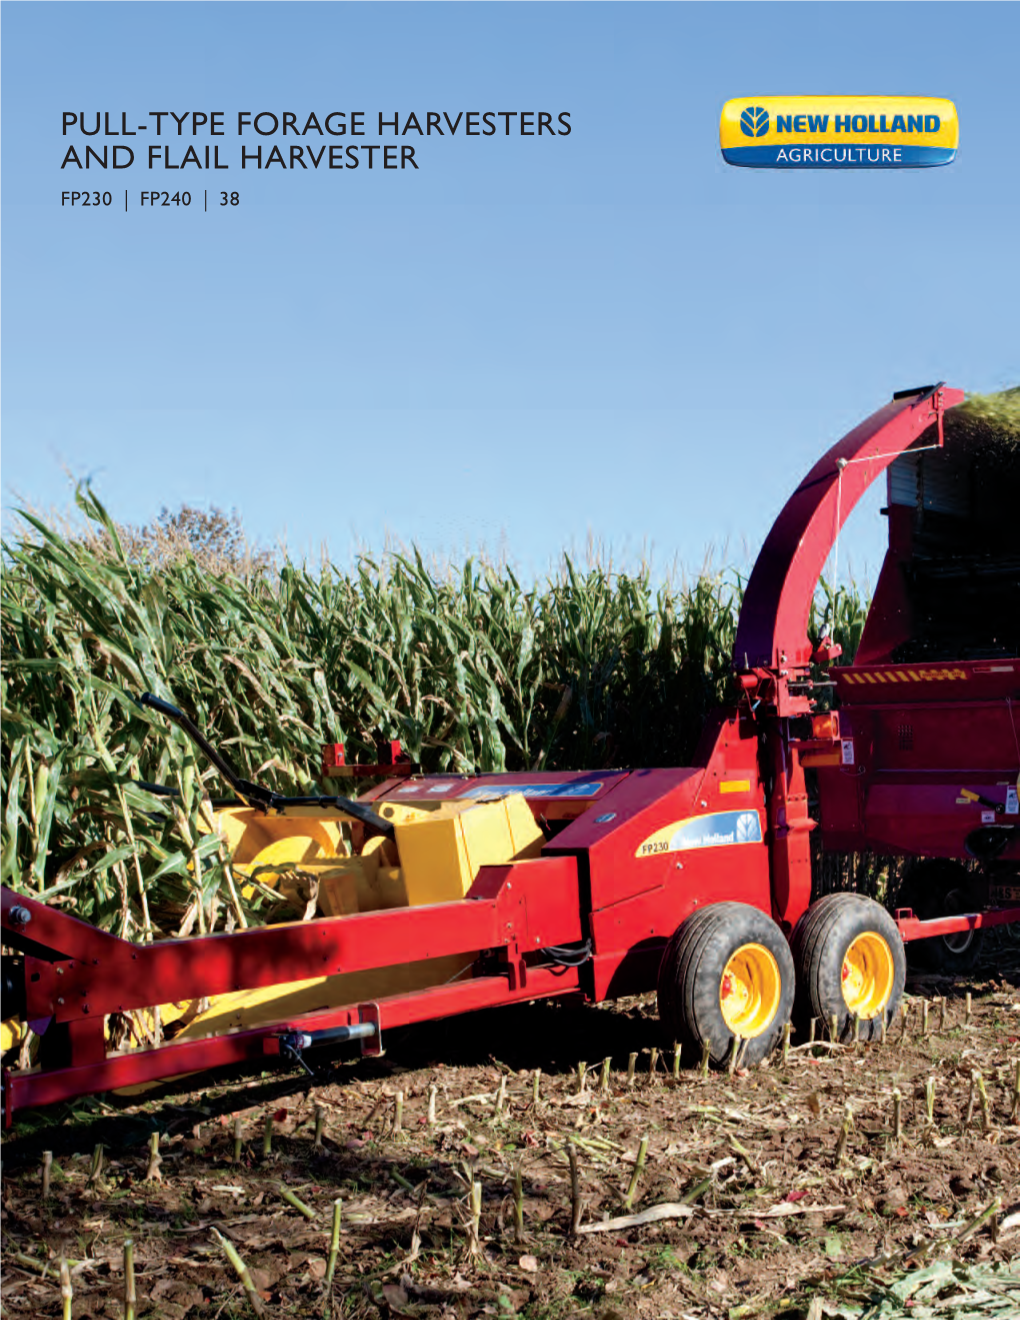 Pull-Type Forage Harvesters and Flail Harvester Fp230 I Fp240 I 38 23 Introduction